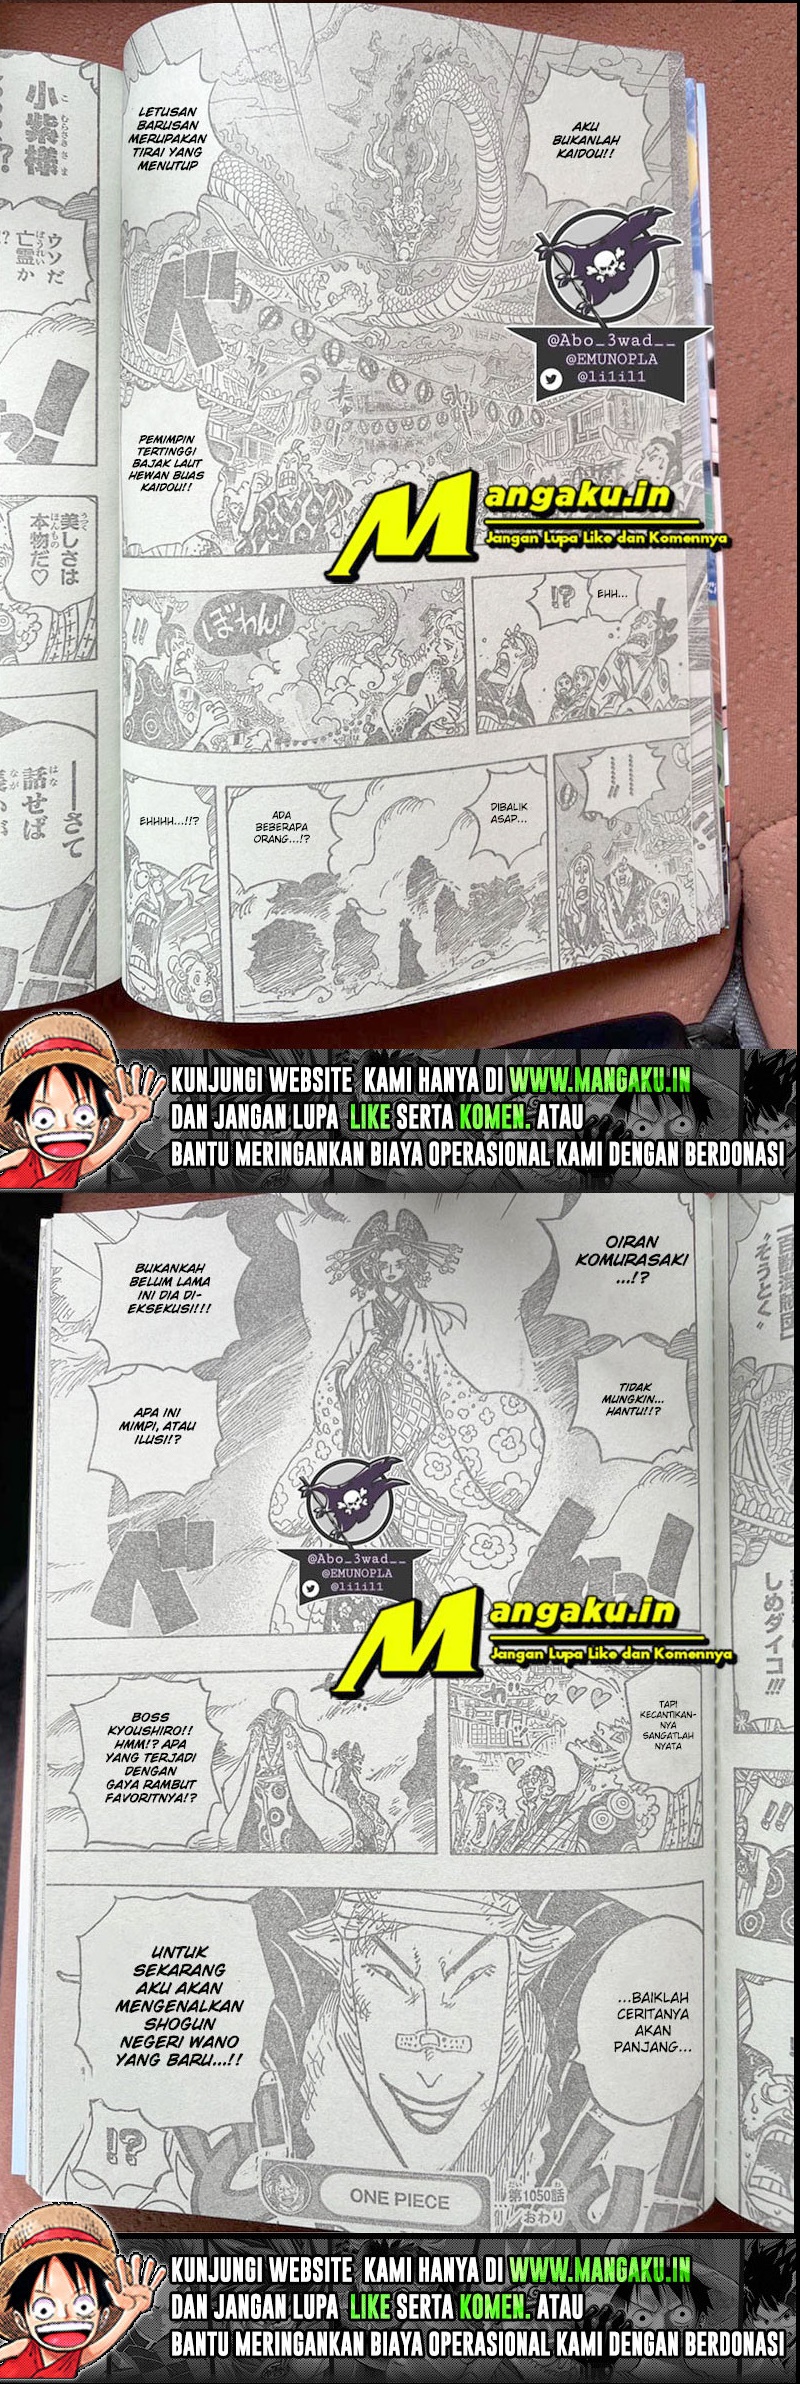 One Piece Chapter 1050 Lq - 39